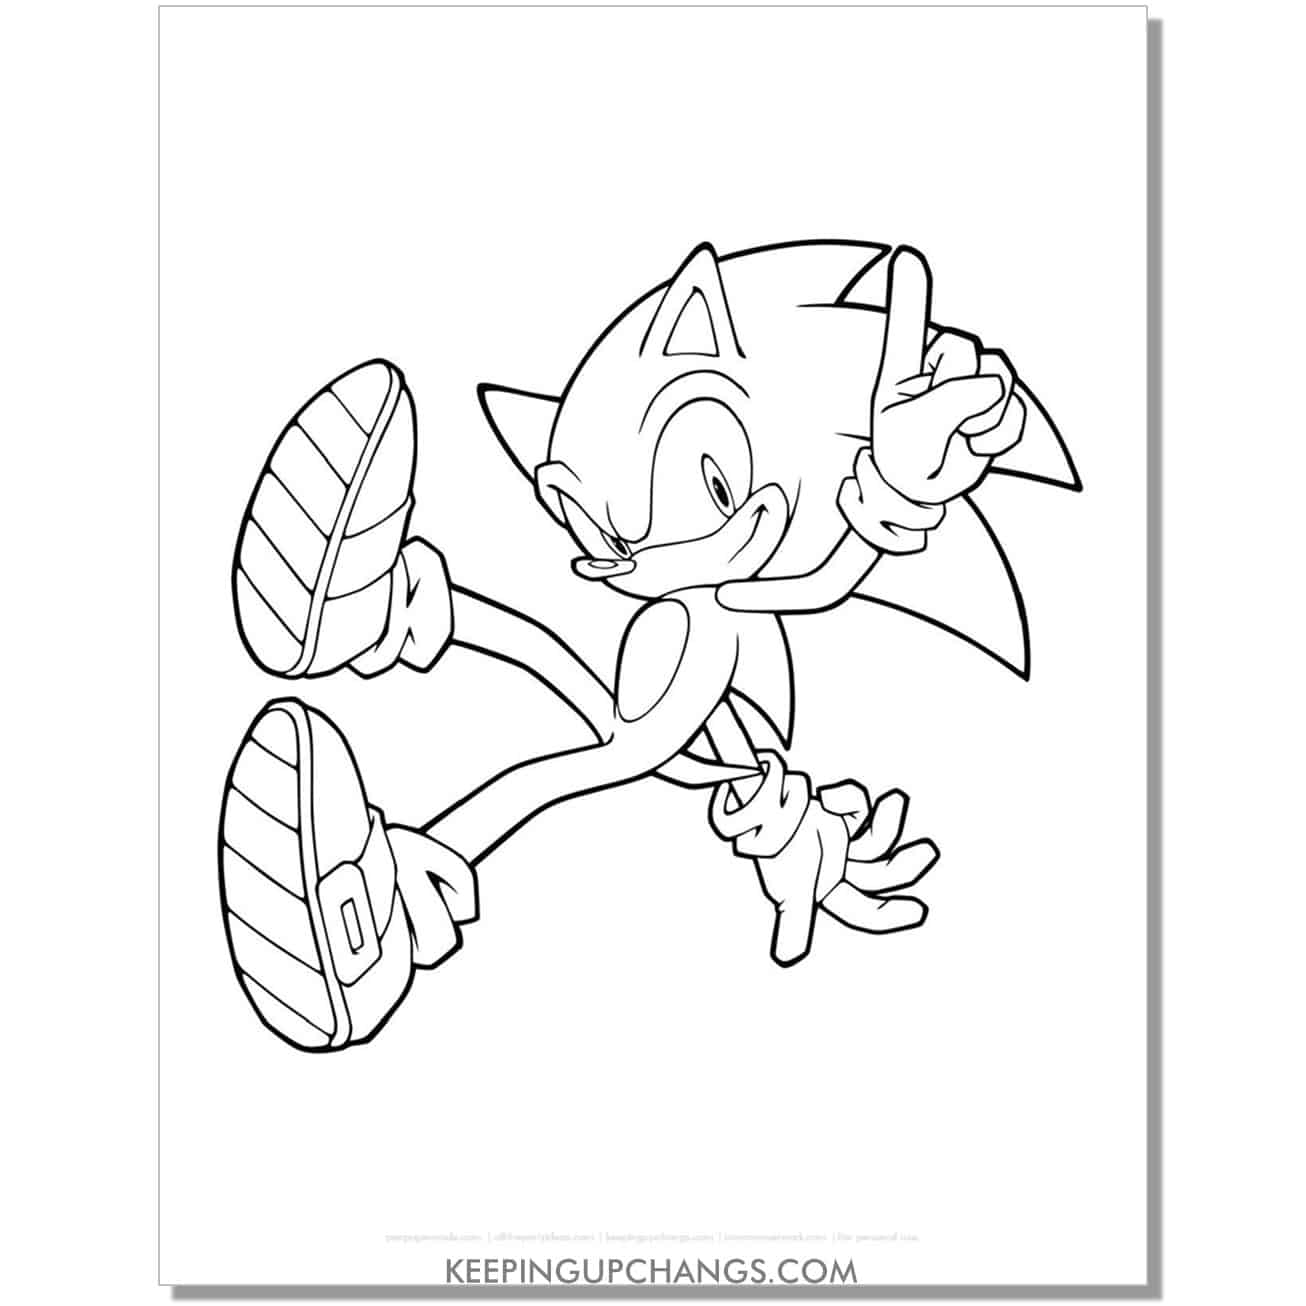 sonic climbing up wall with finger pointing up coloring page.